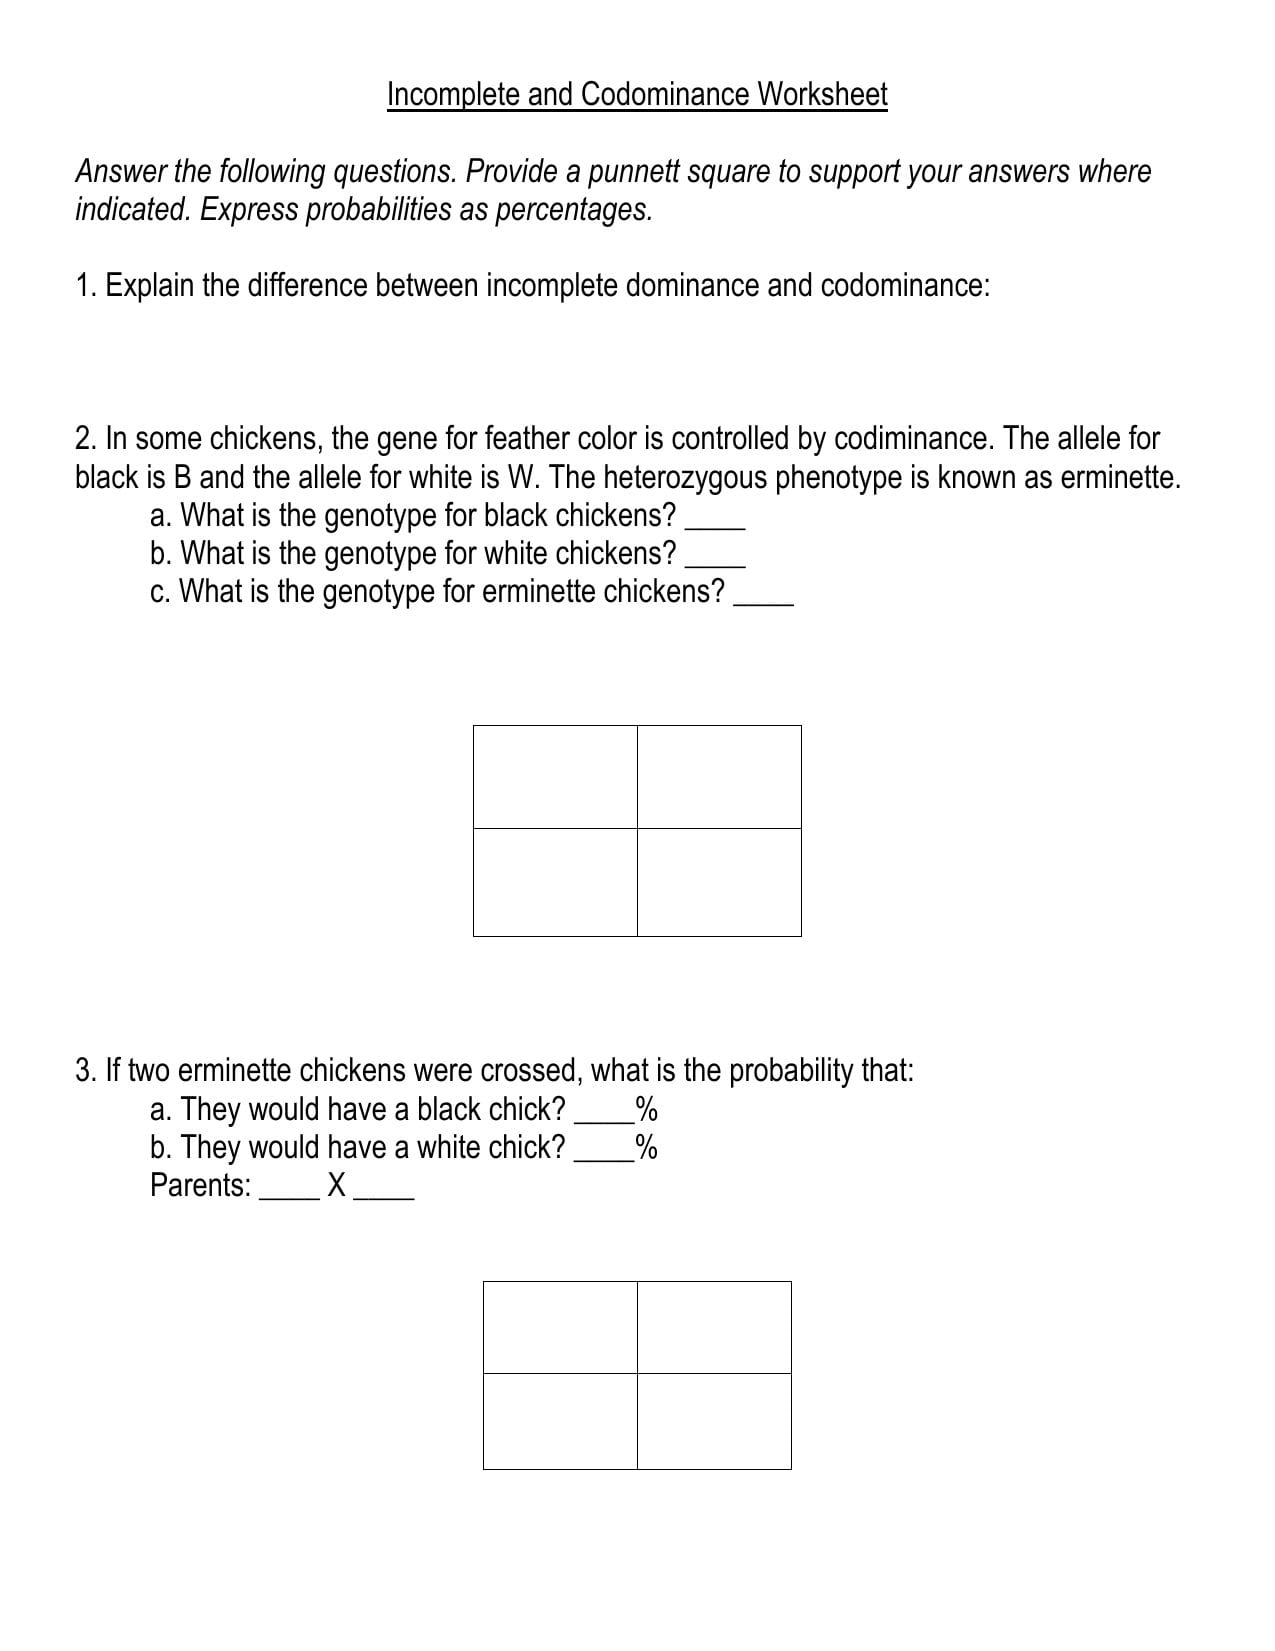 Incomplete And Codominance Worksheet And Codominance Incomplete Dominance Worksheet Answers